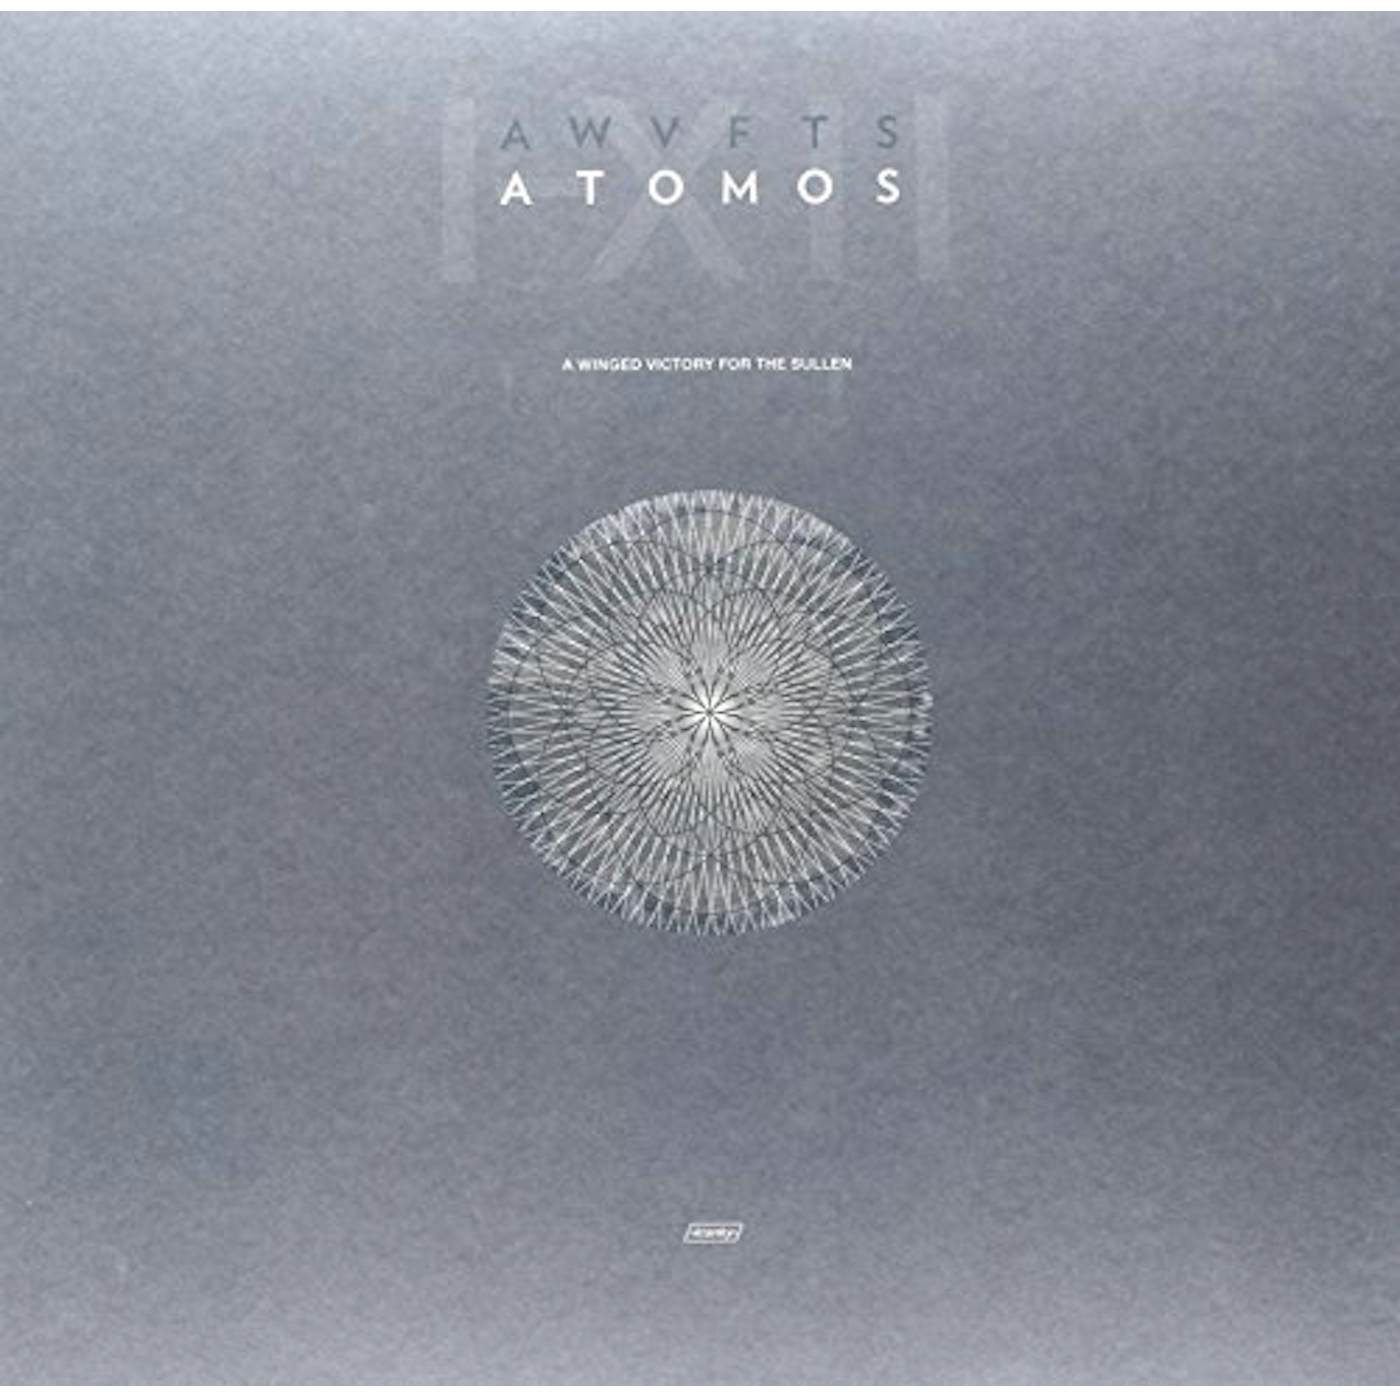 A Winged Victory for the Sullen Atomos Vinyl Record